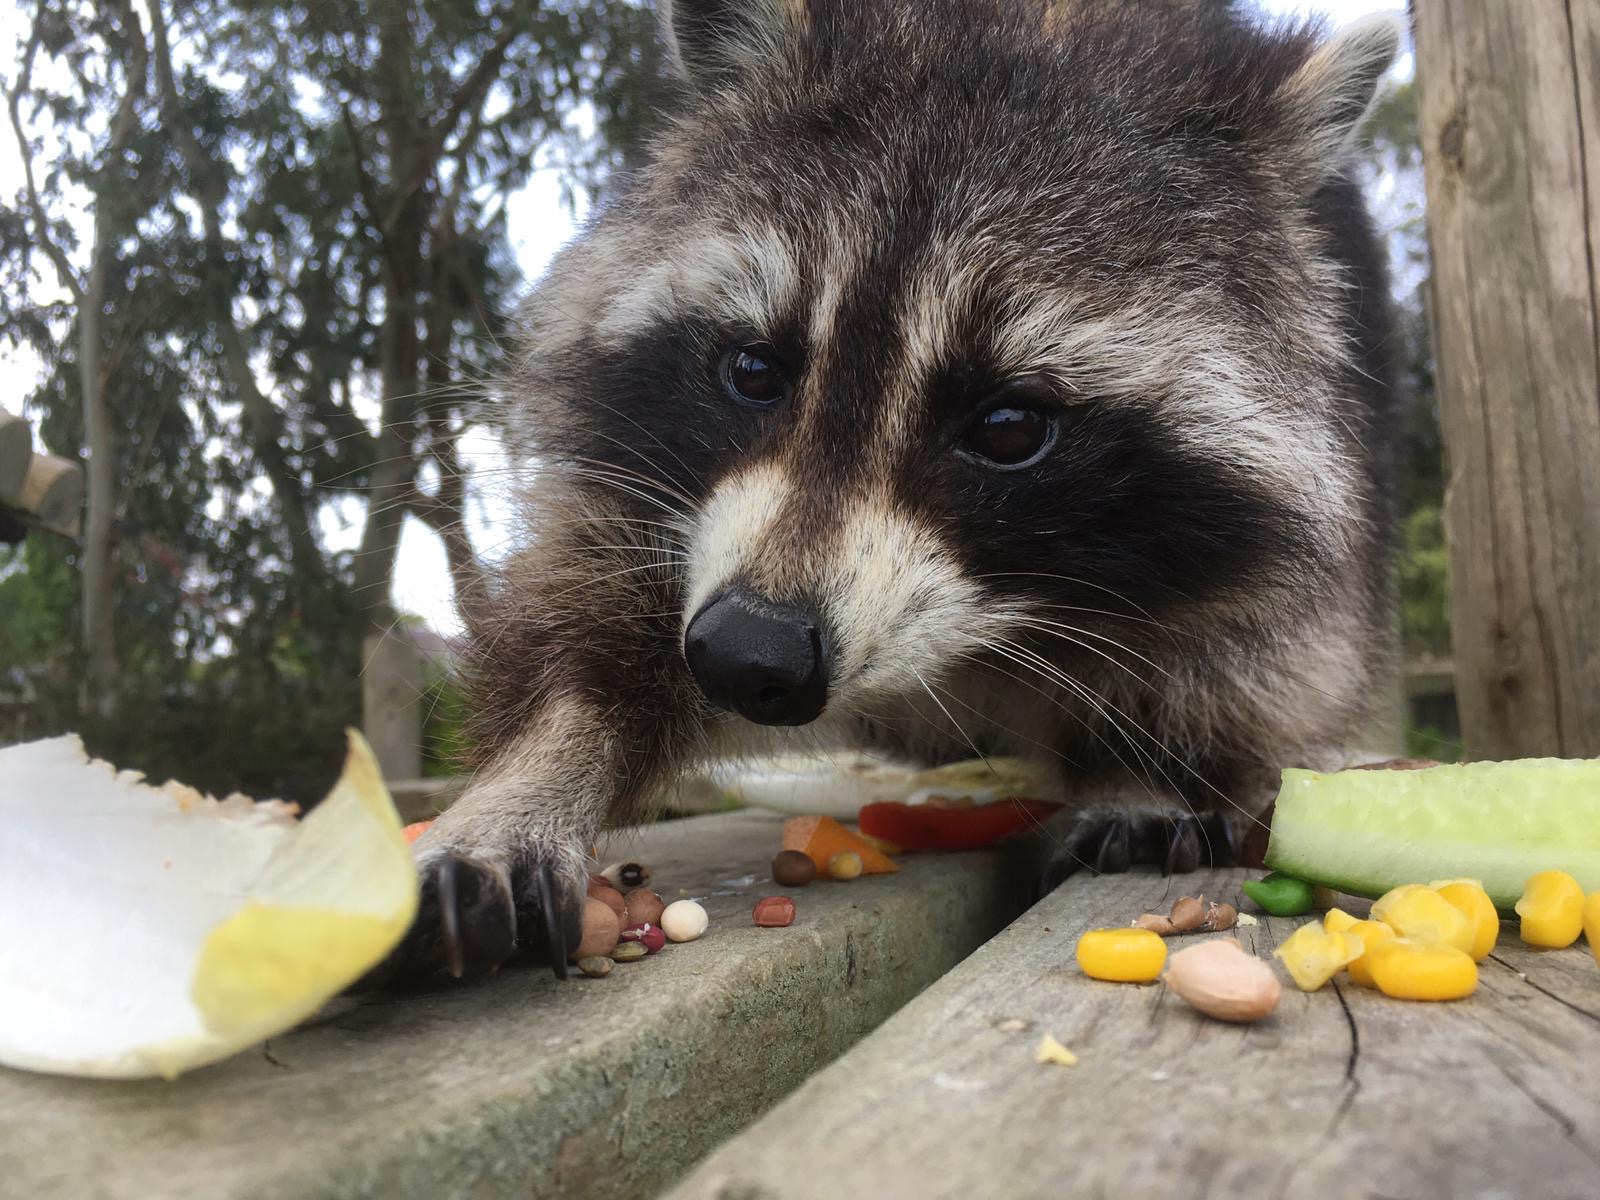 Turnip the raccoon at Drusillas Park in Alfriston, East Sussex.